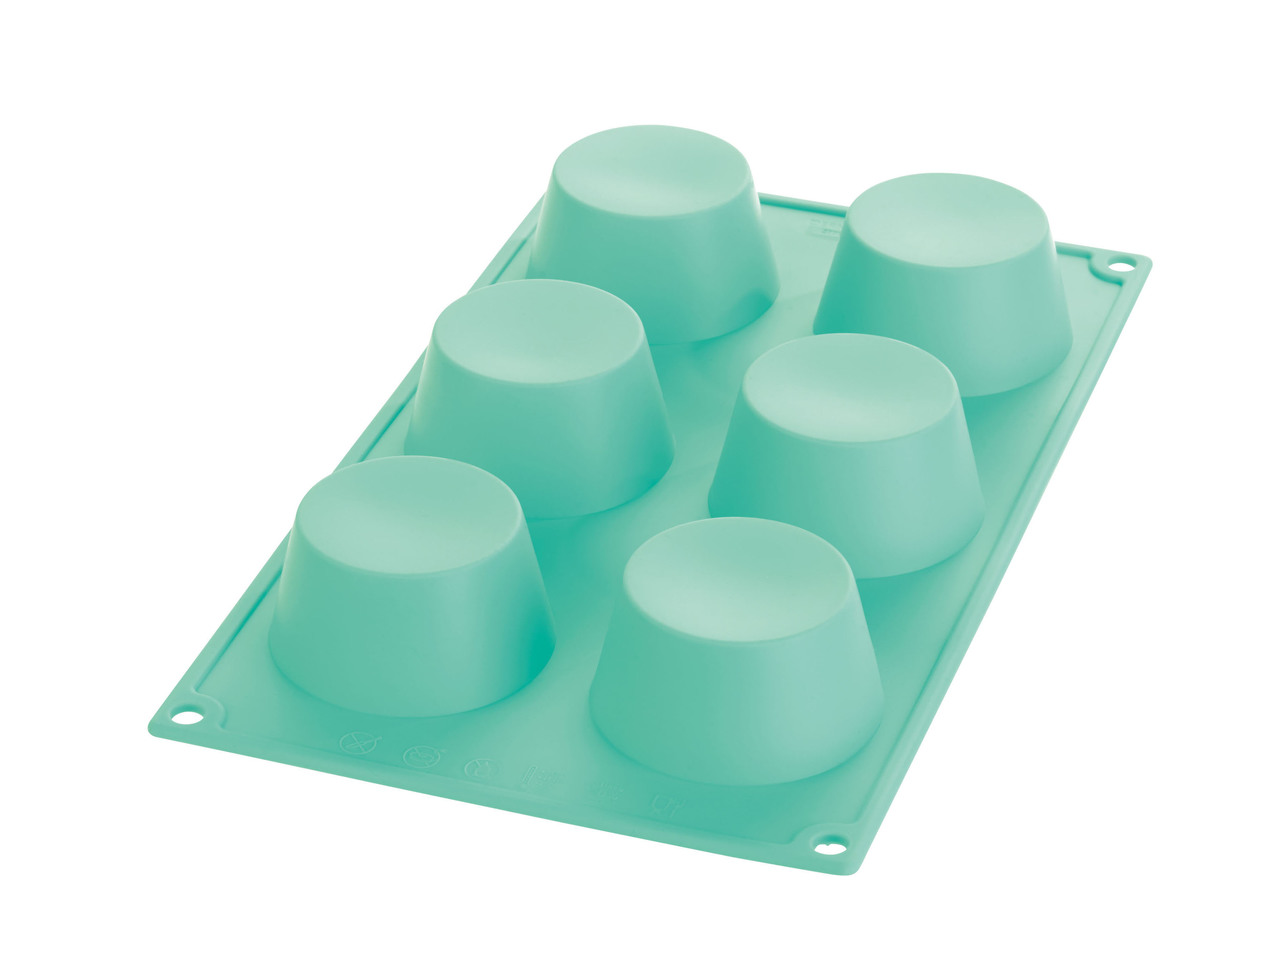 Baking Mould made from Silicone